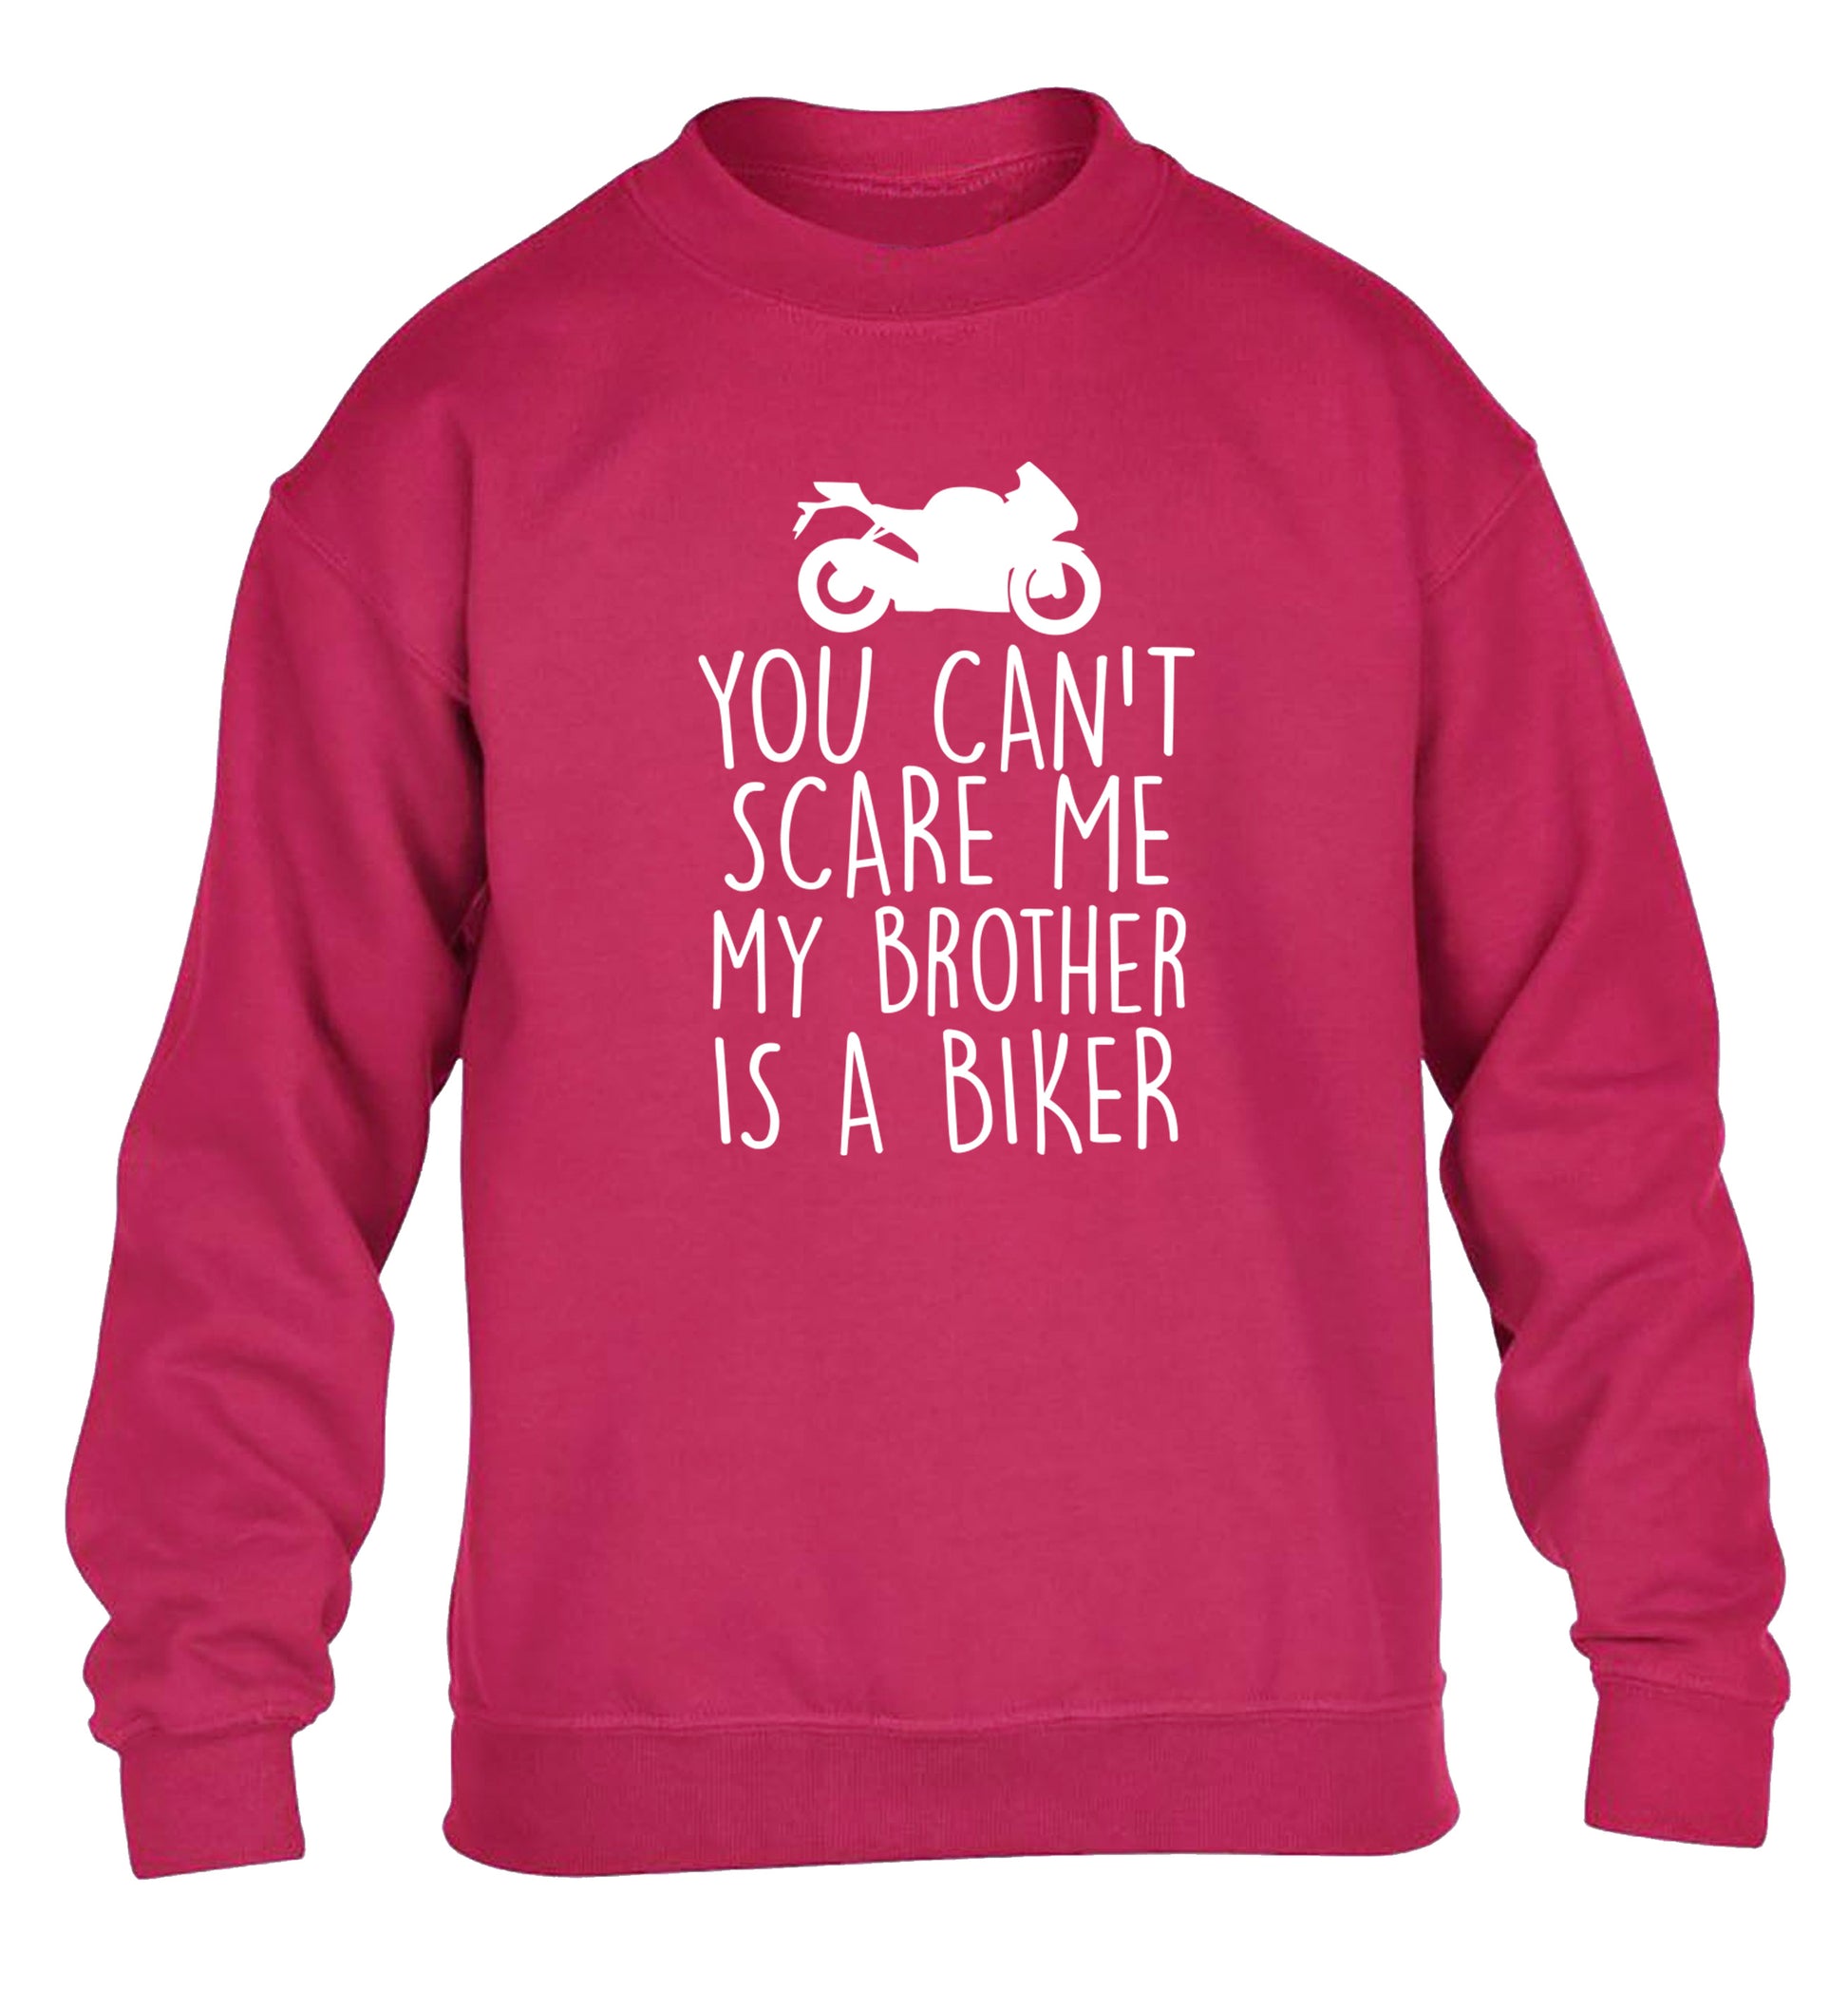 You can't scare me my brother is a biker children's pink sweater 12-13 Years